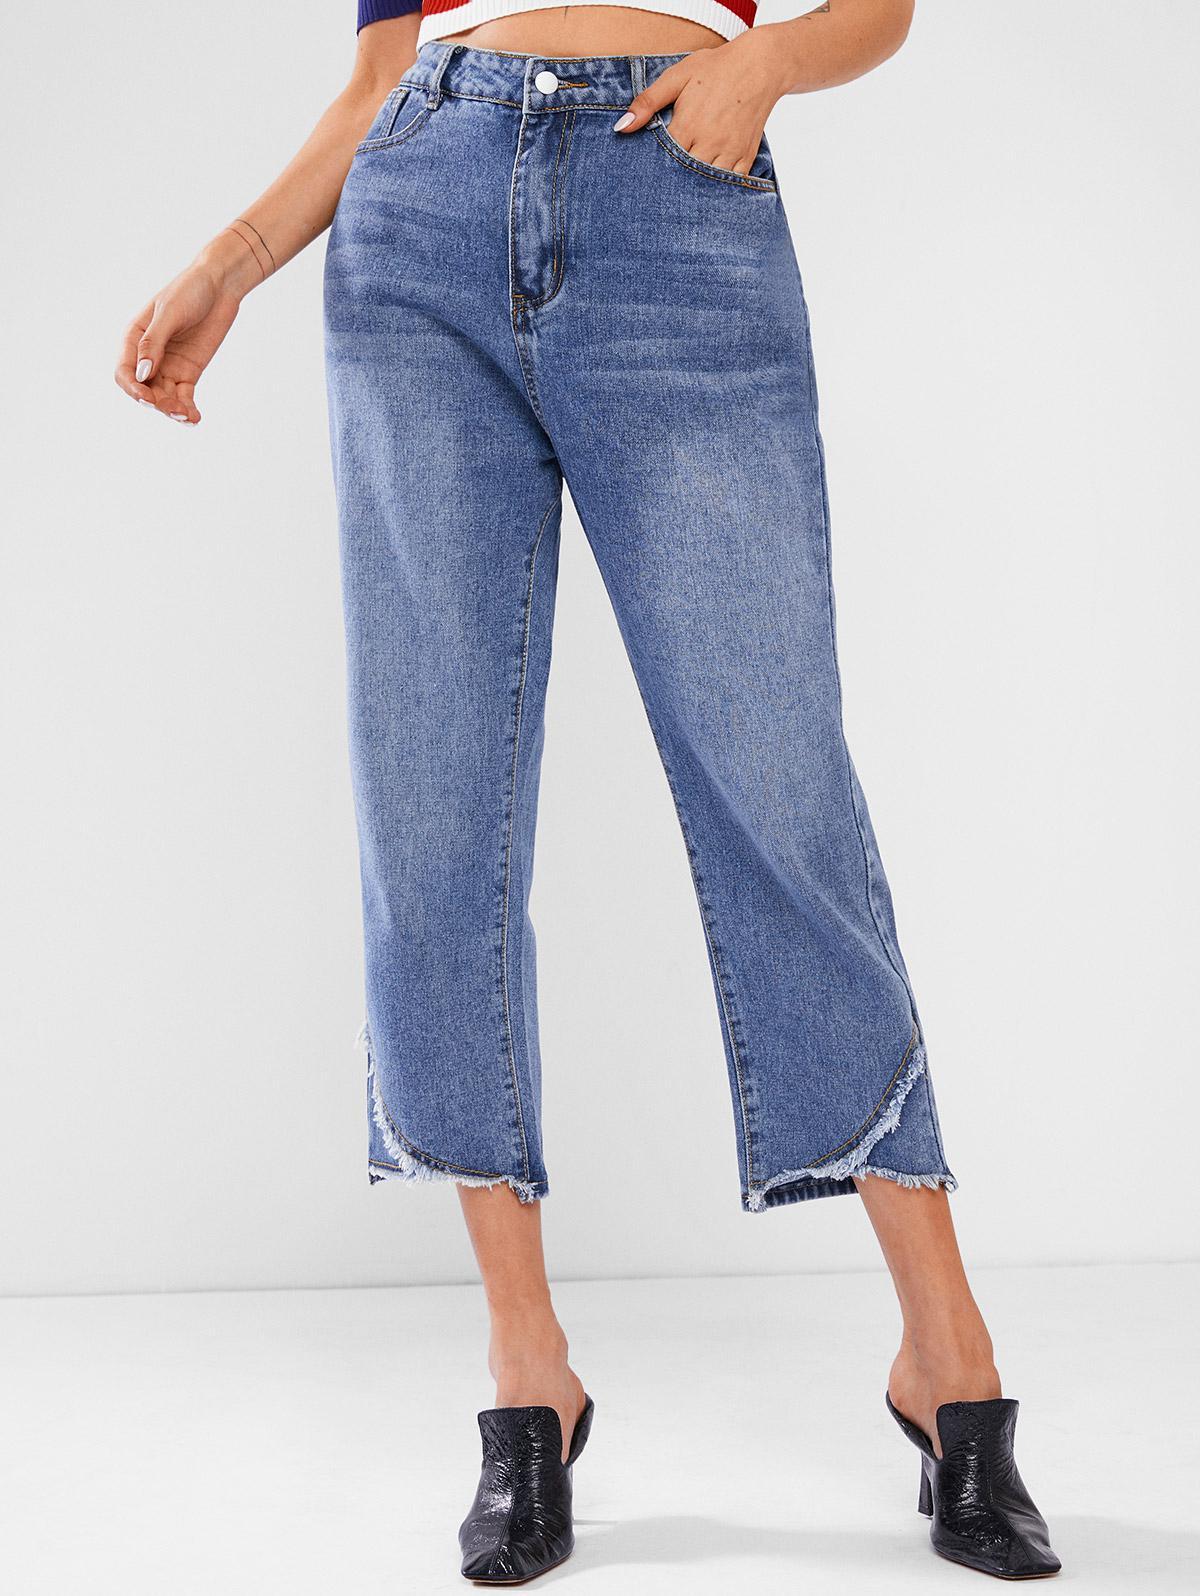 Zaful Frayed Trim baggy Jeans in Blue | Lyst